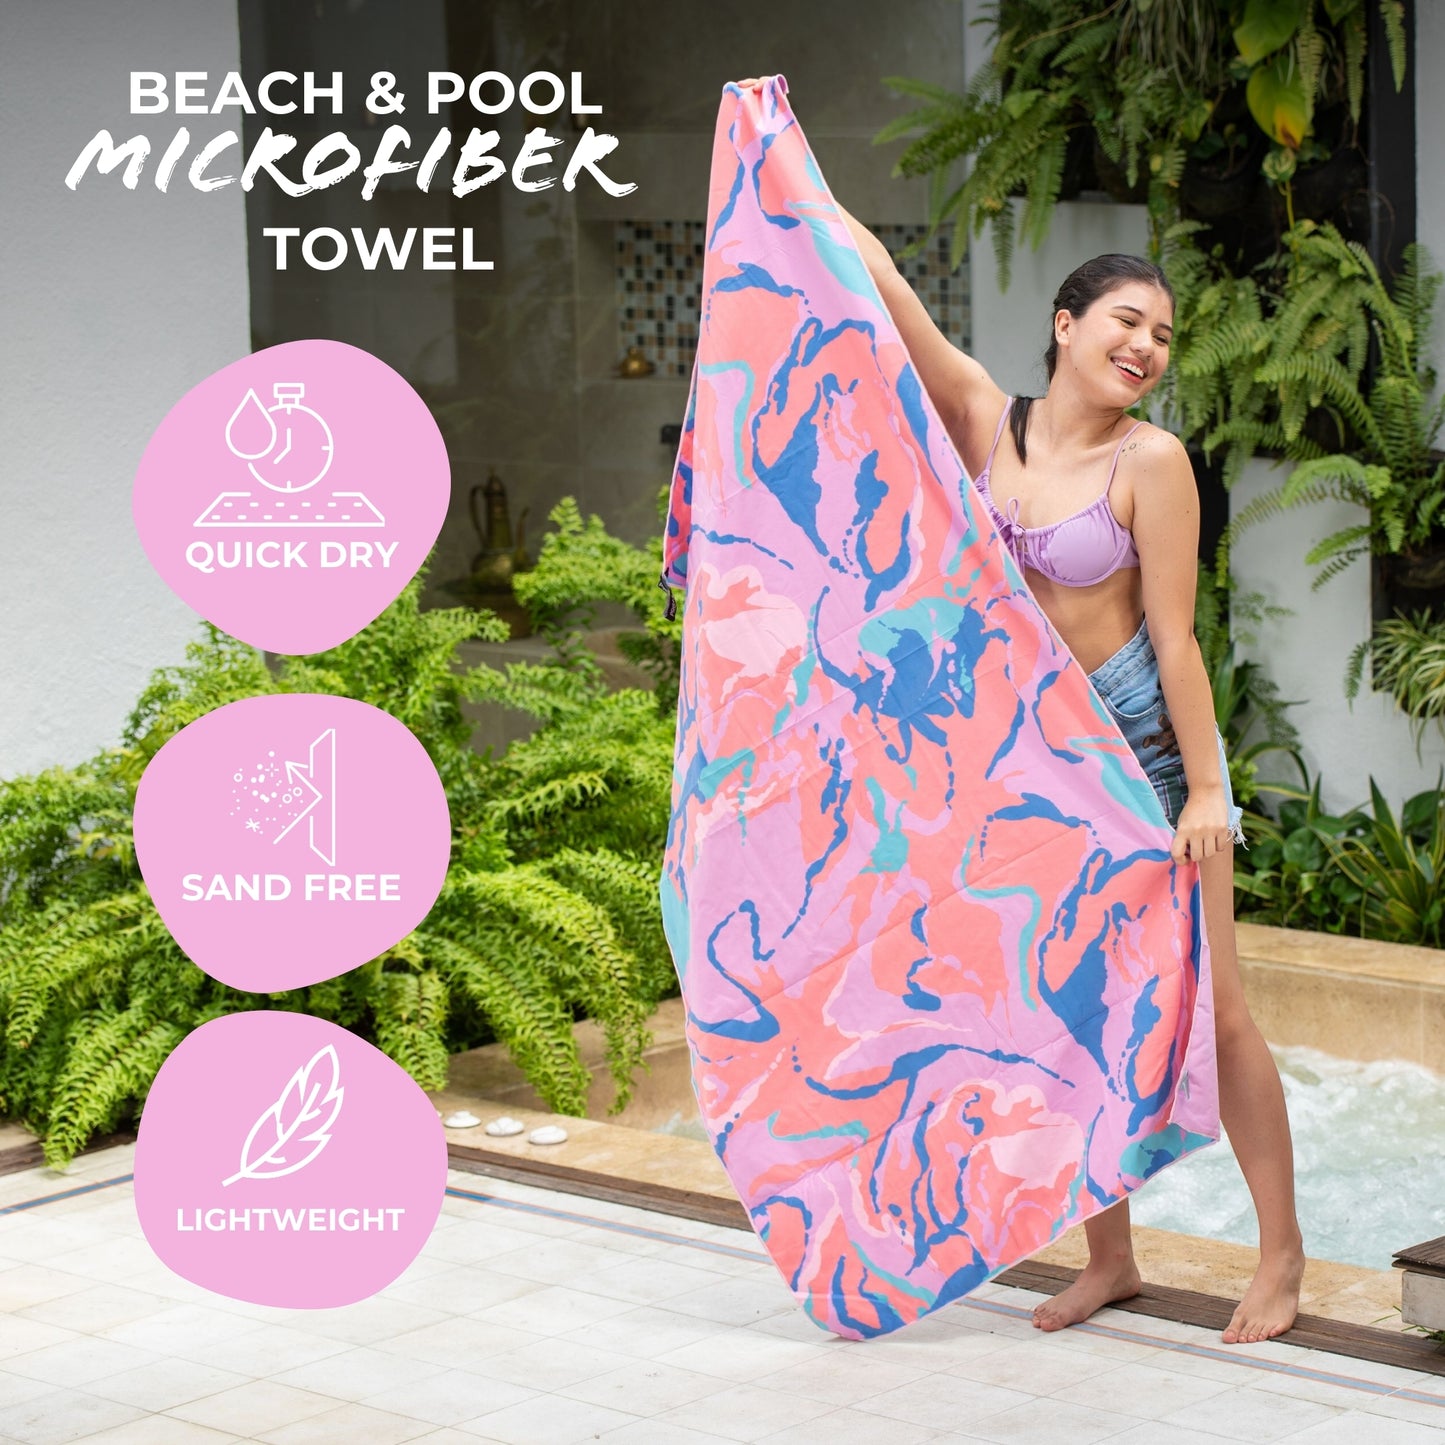 Microfiber Towel for Adults | Extra Large 35" x 70" |  Quick Dry with Pouch, Aqua pink